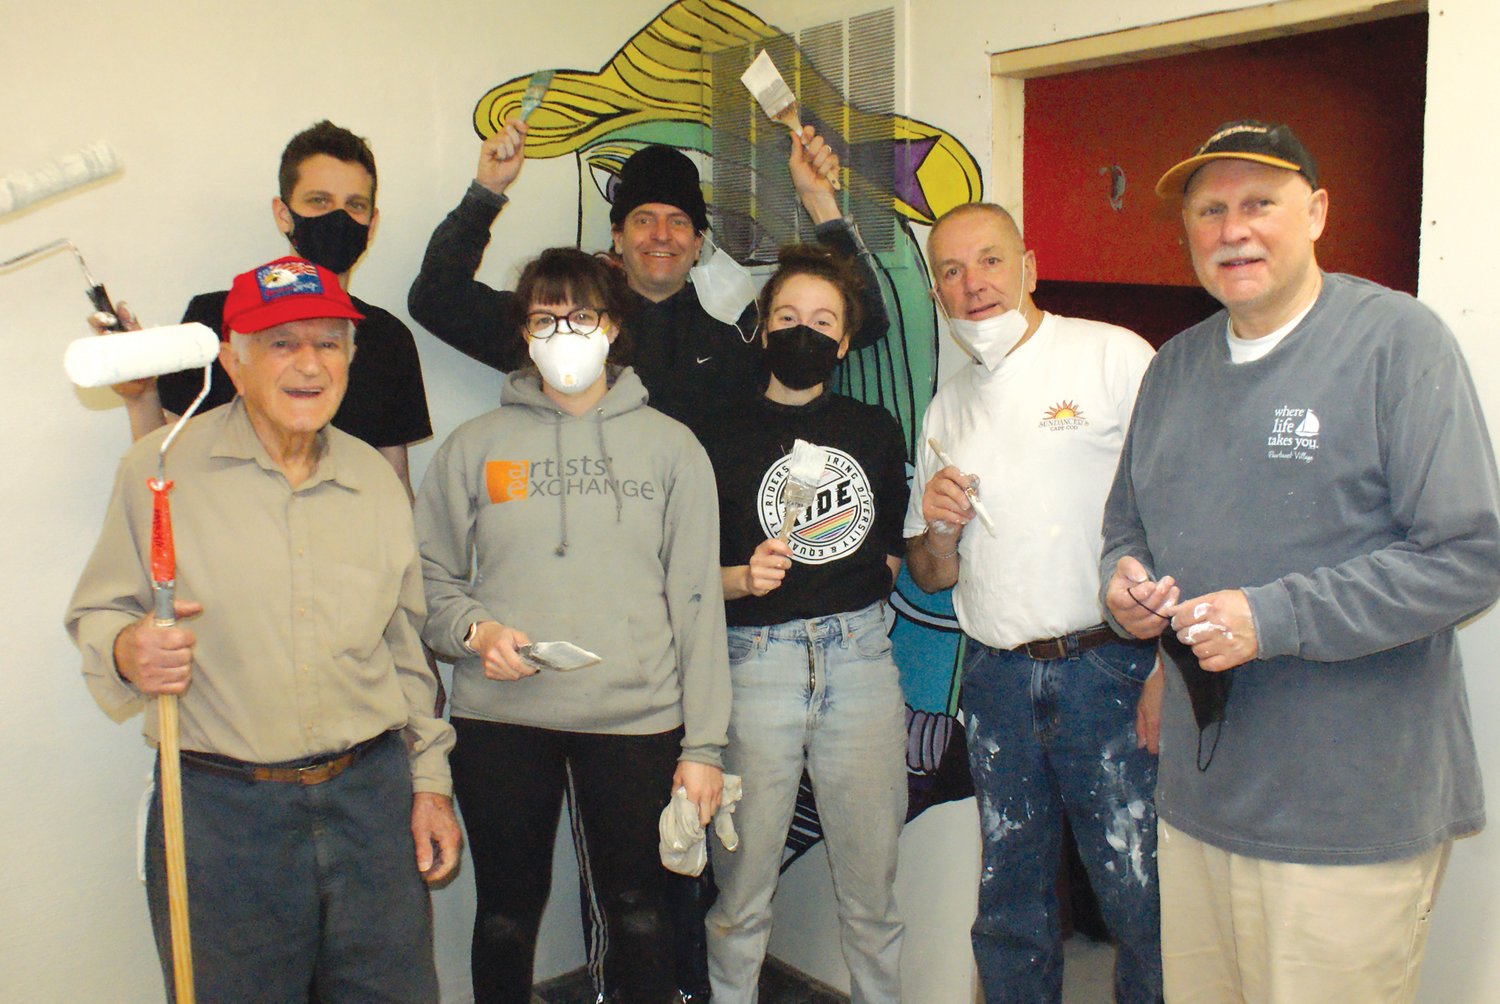 PRE-GAMING: What better way to spend a snowy Super Bowl Sunday but to volunteer
to make improvements at the Artists’ Exchange? That is how local Rotarians and employees
at the Artists’ Exchange spent it. Director Shannon Casey was joined by (back
row) Tom Glasgow and Max Pratt, Lou Marciano, Kaitlyn Cirielli, Roy Evans and Adrian
Beaulieu.